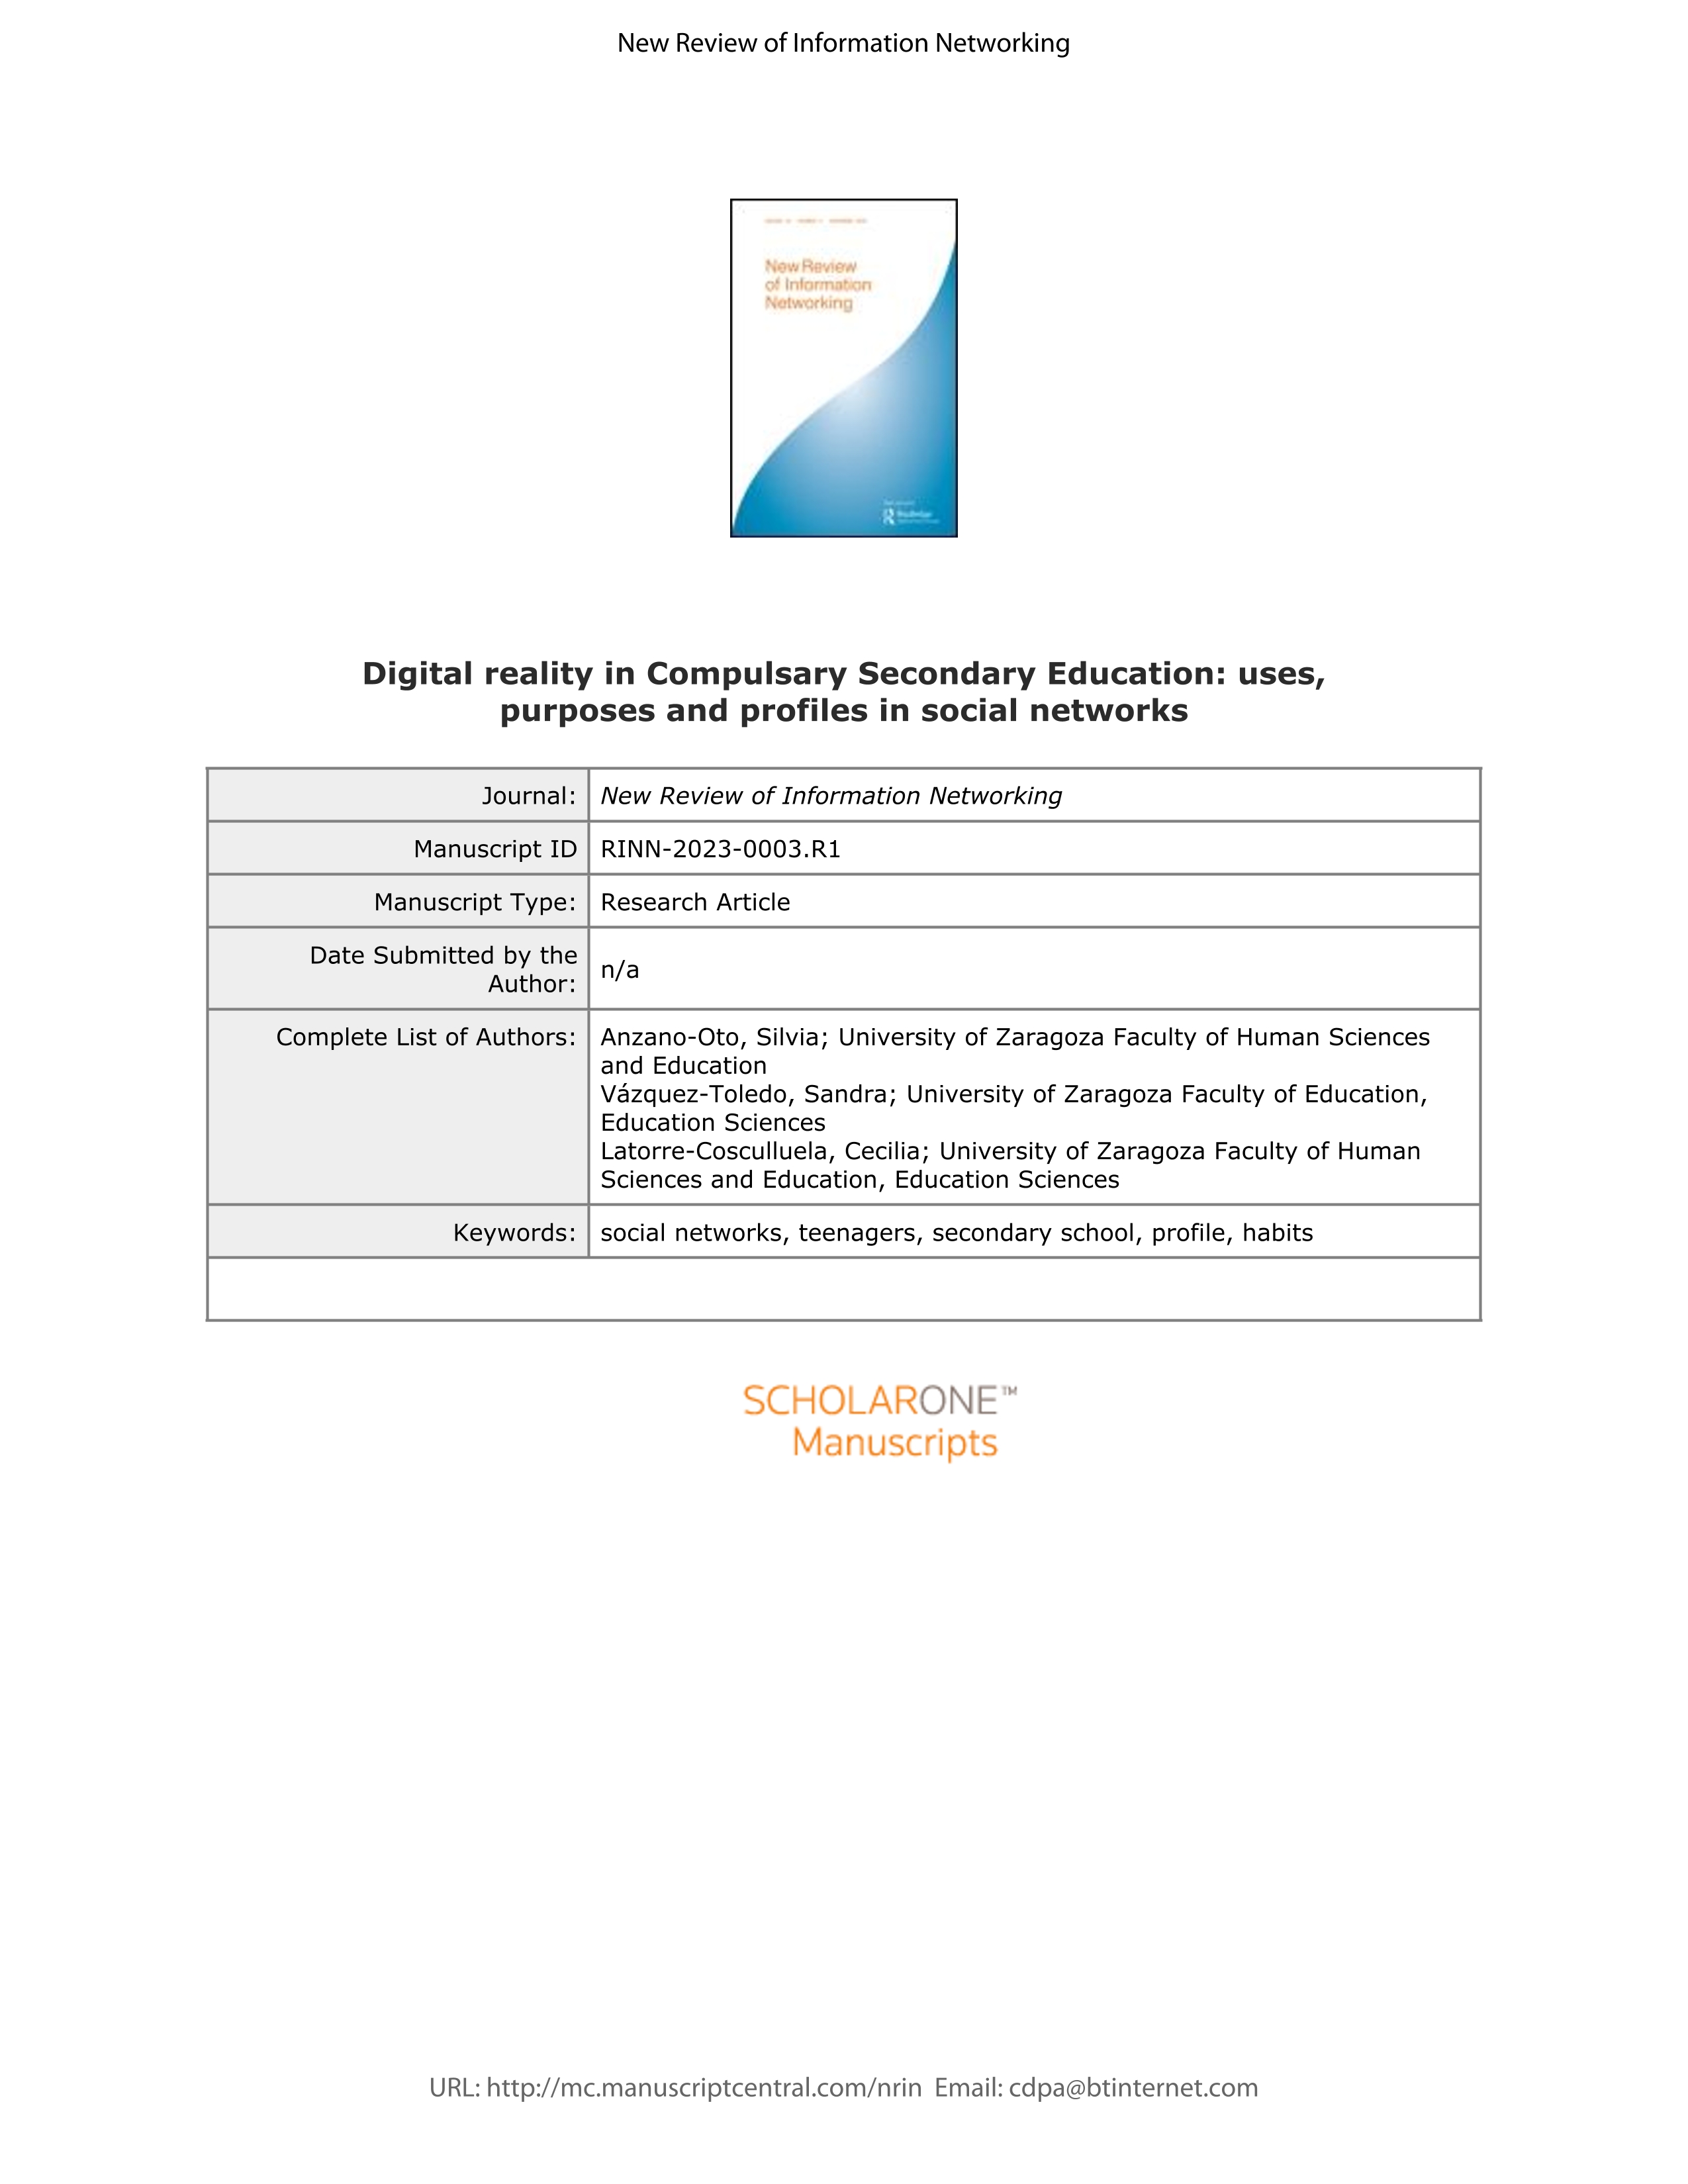 Digital reality in Compulsary Secondary Education: uses, purposes and profiles in social networks